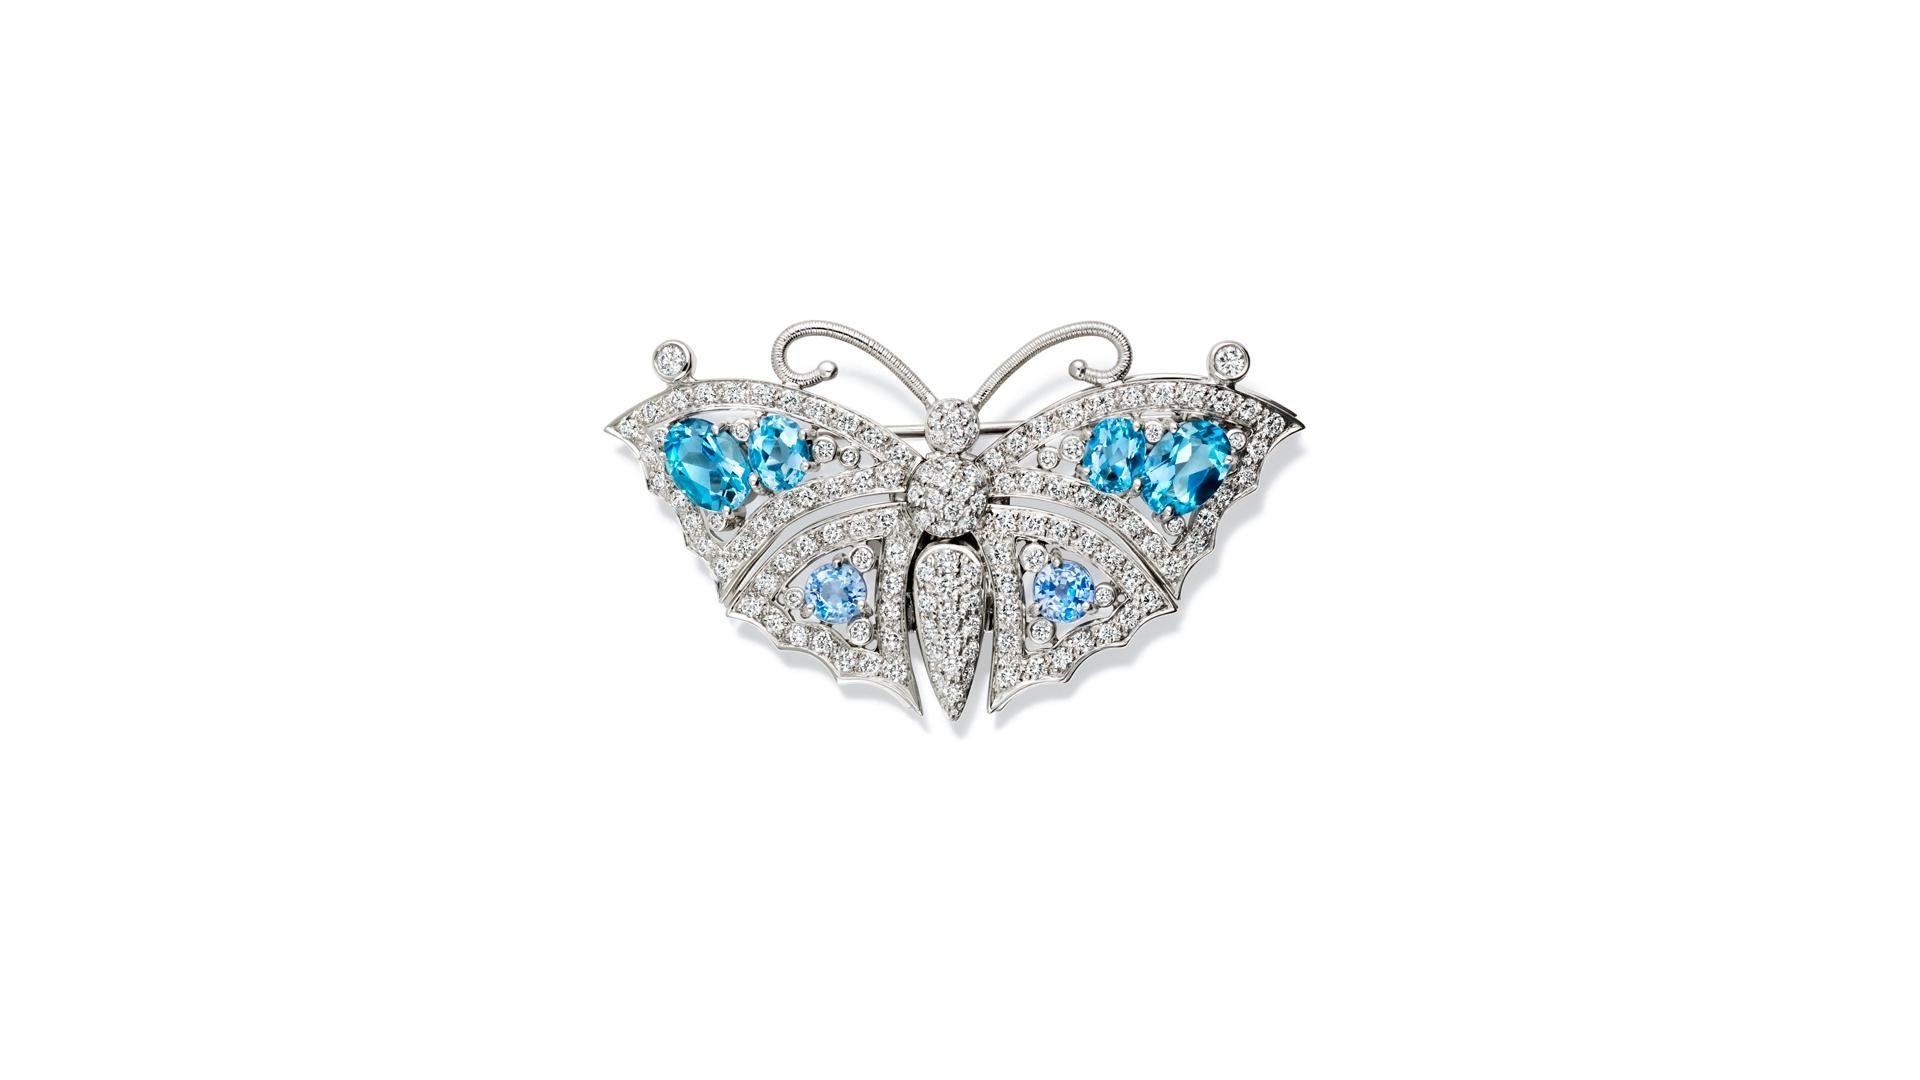 Beijing butterfly 18 carat white gold interchangeable brooch front with blue sapphires, aquamarine and diamonds. From the Journey to China.